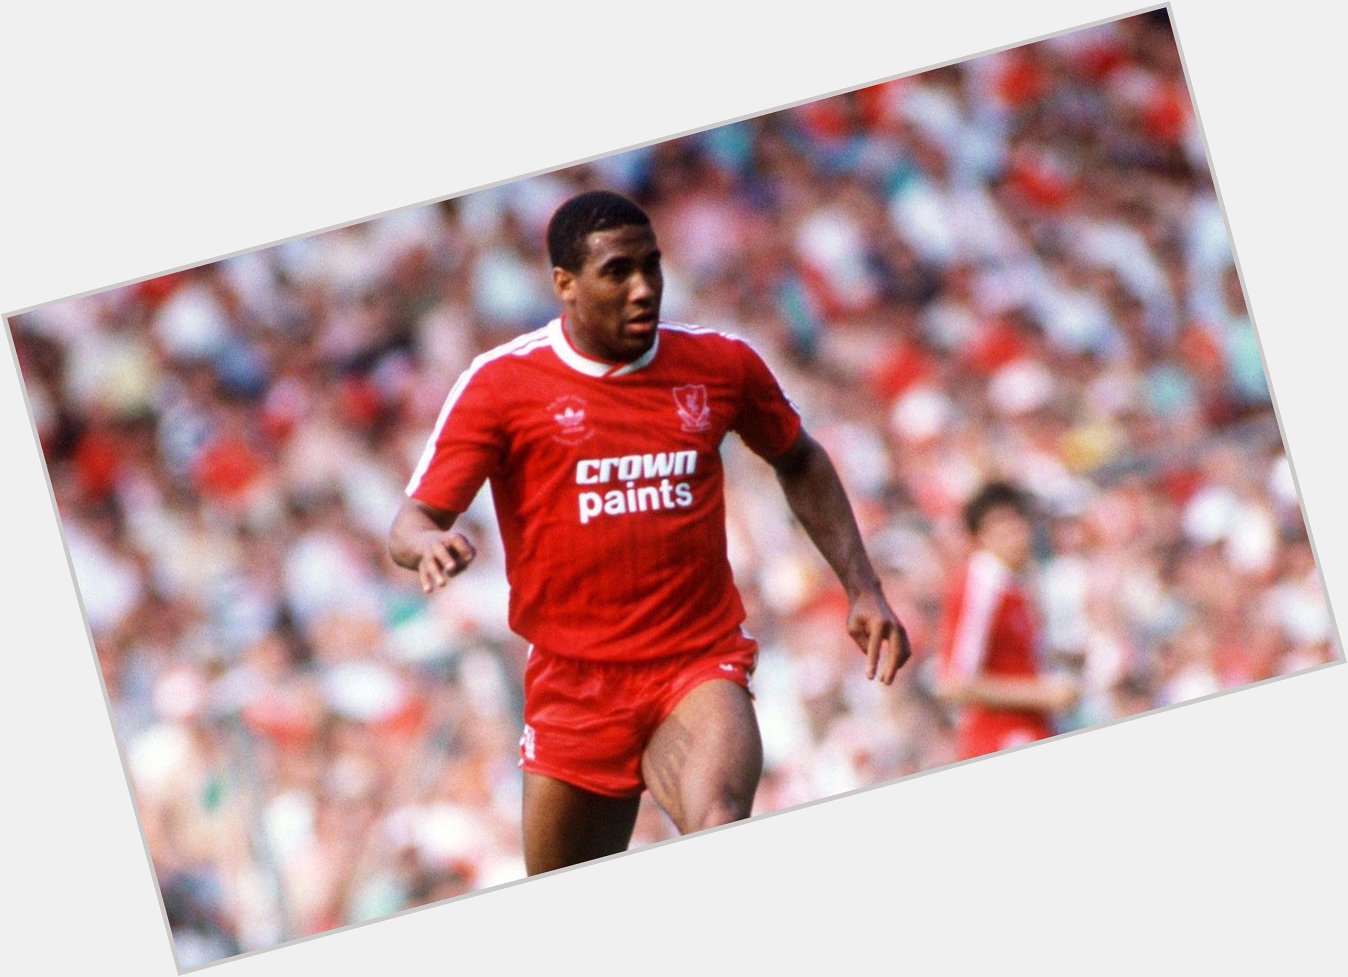 Happy Birthday to John Barnes! The man made 407 appearances for the Reds, scoring 108. 